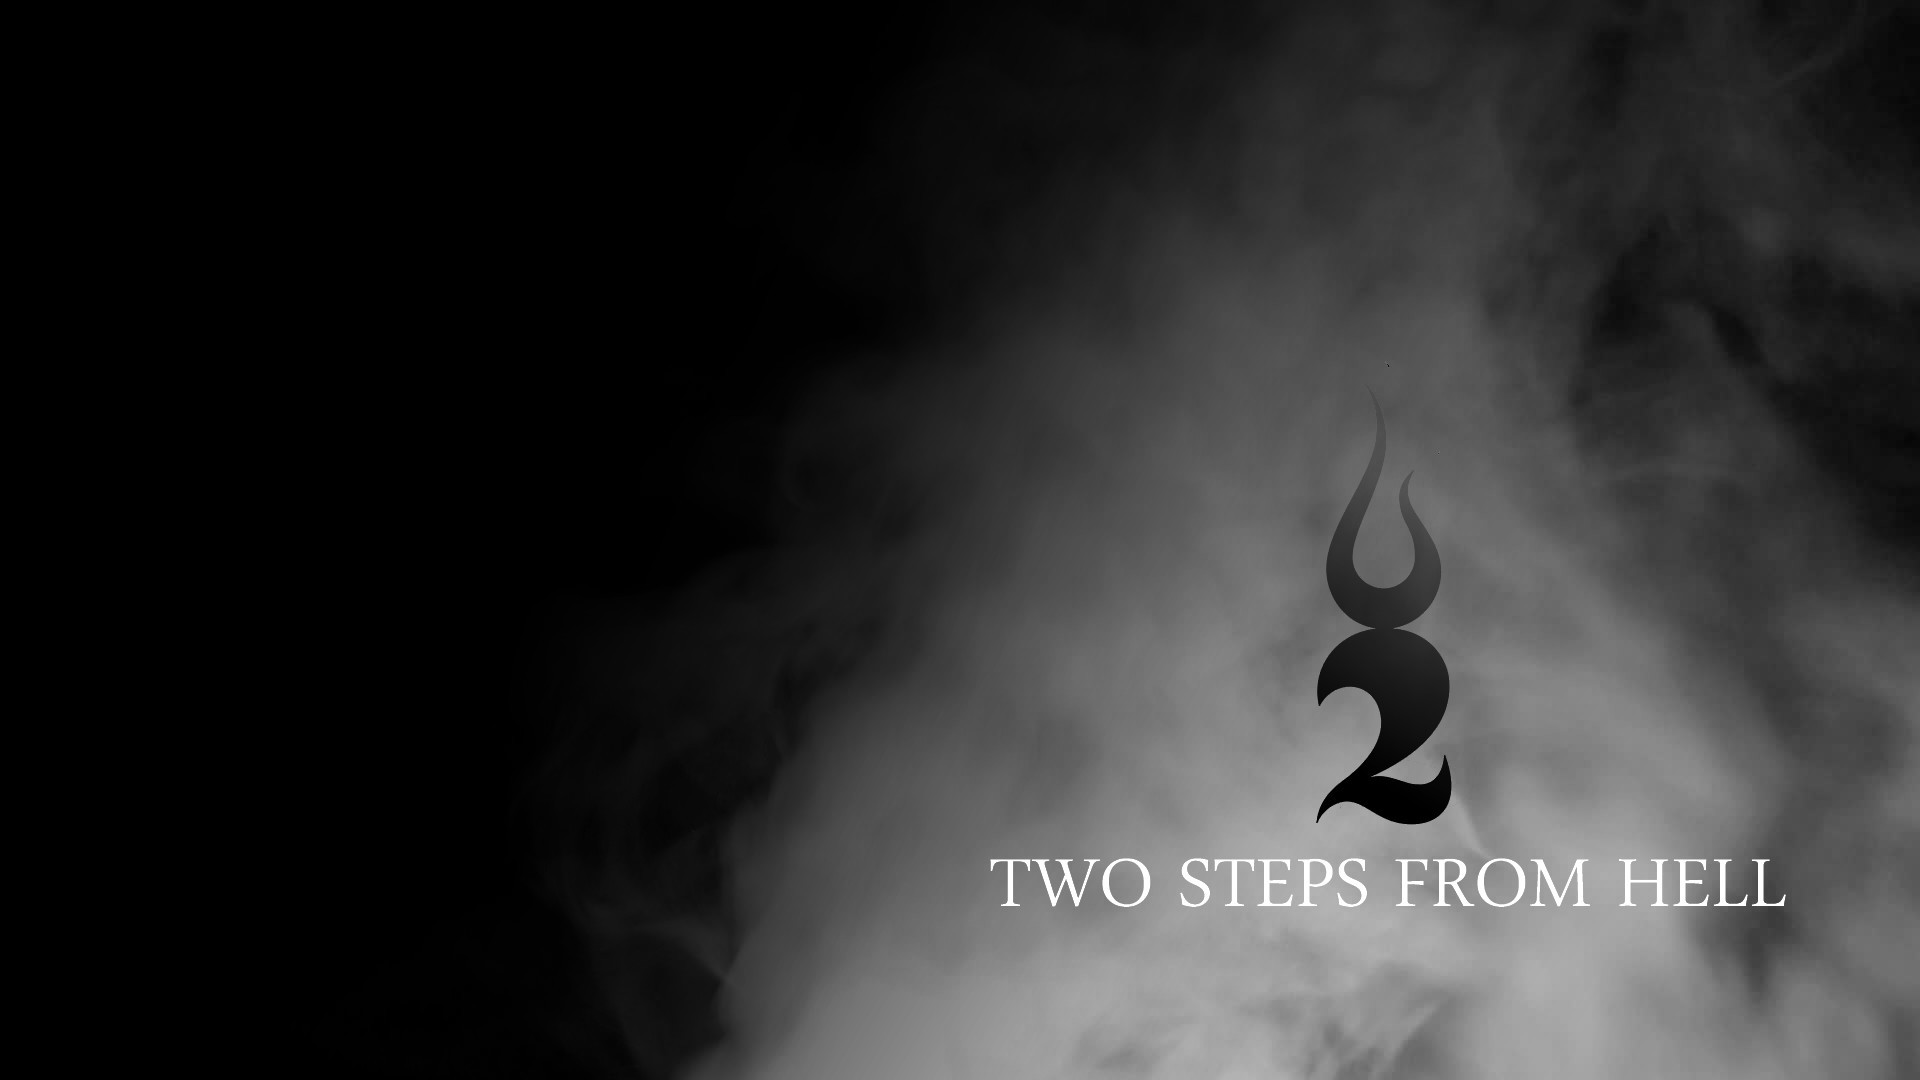 1920x1080 ... Two Steps From Hell Wallpaper by xxJoracoxx